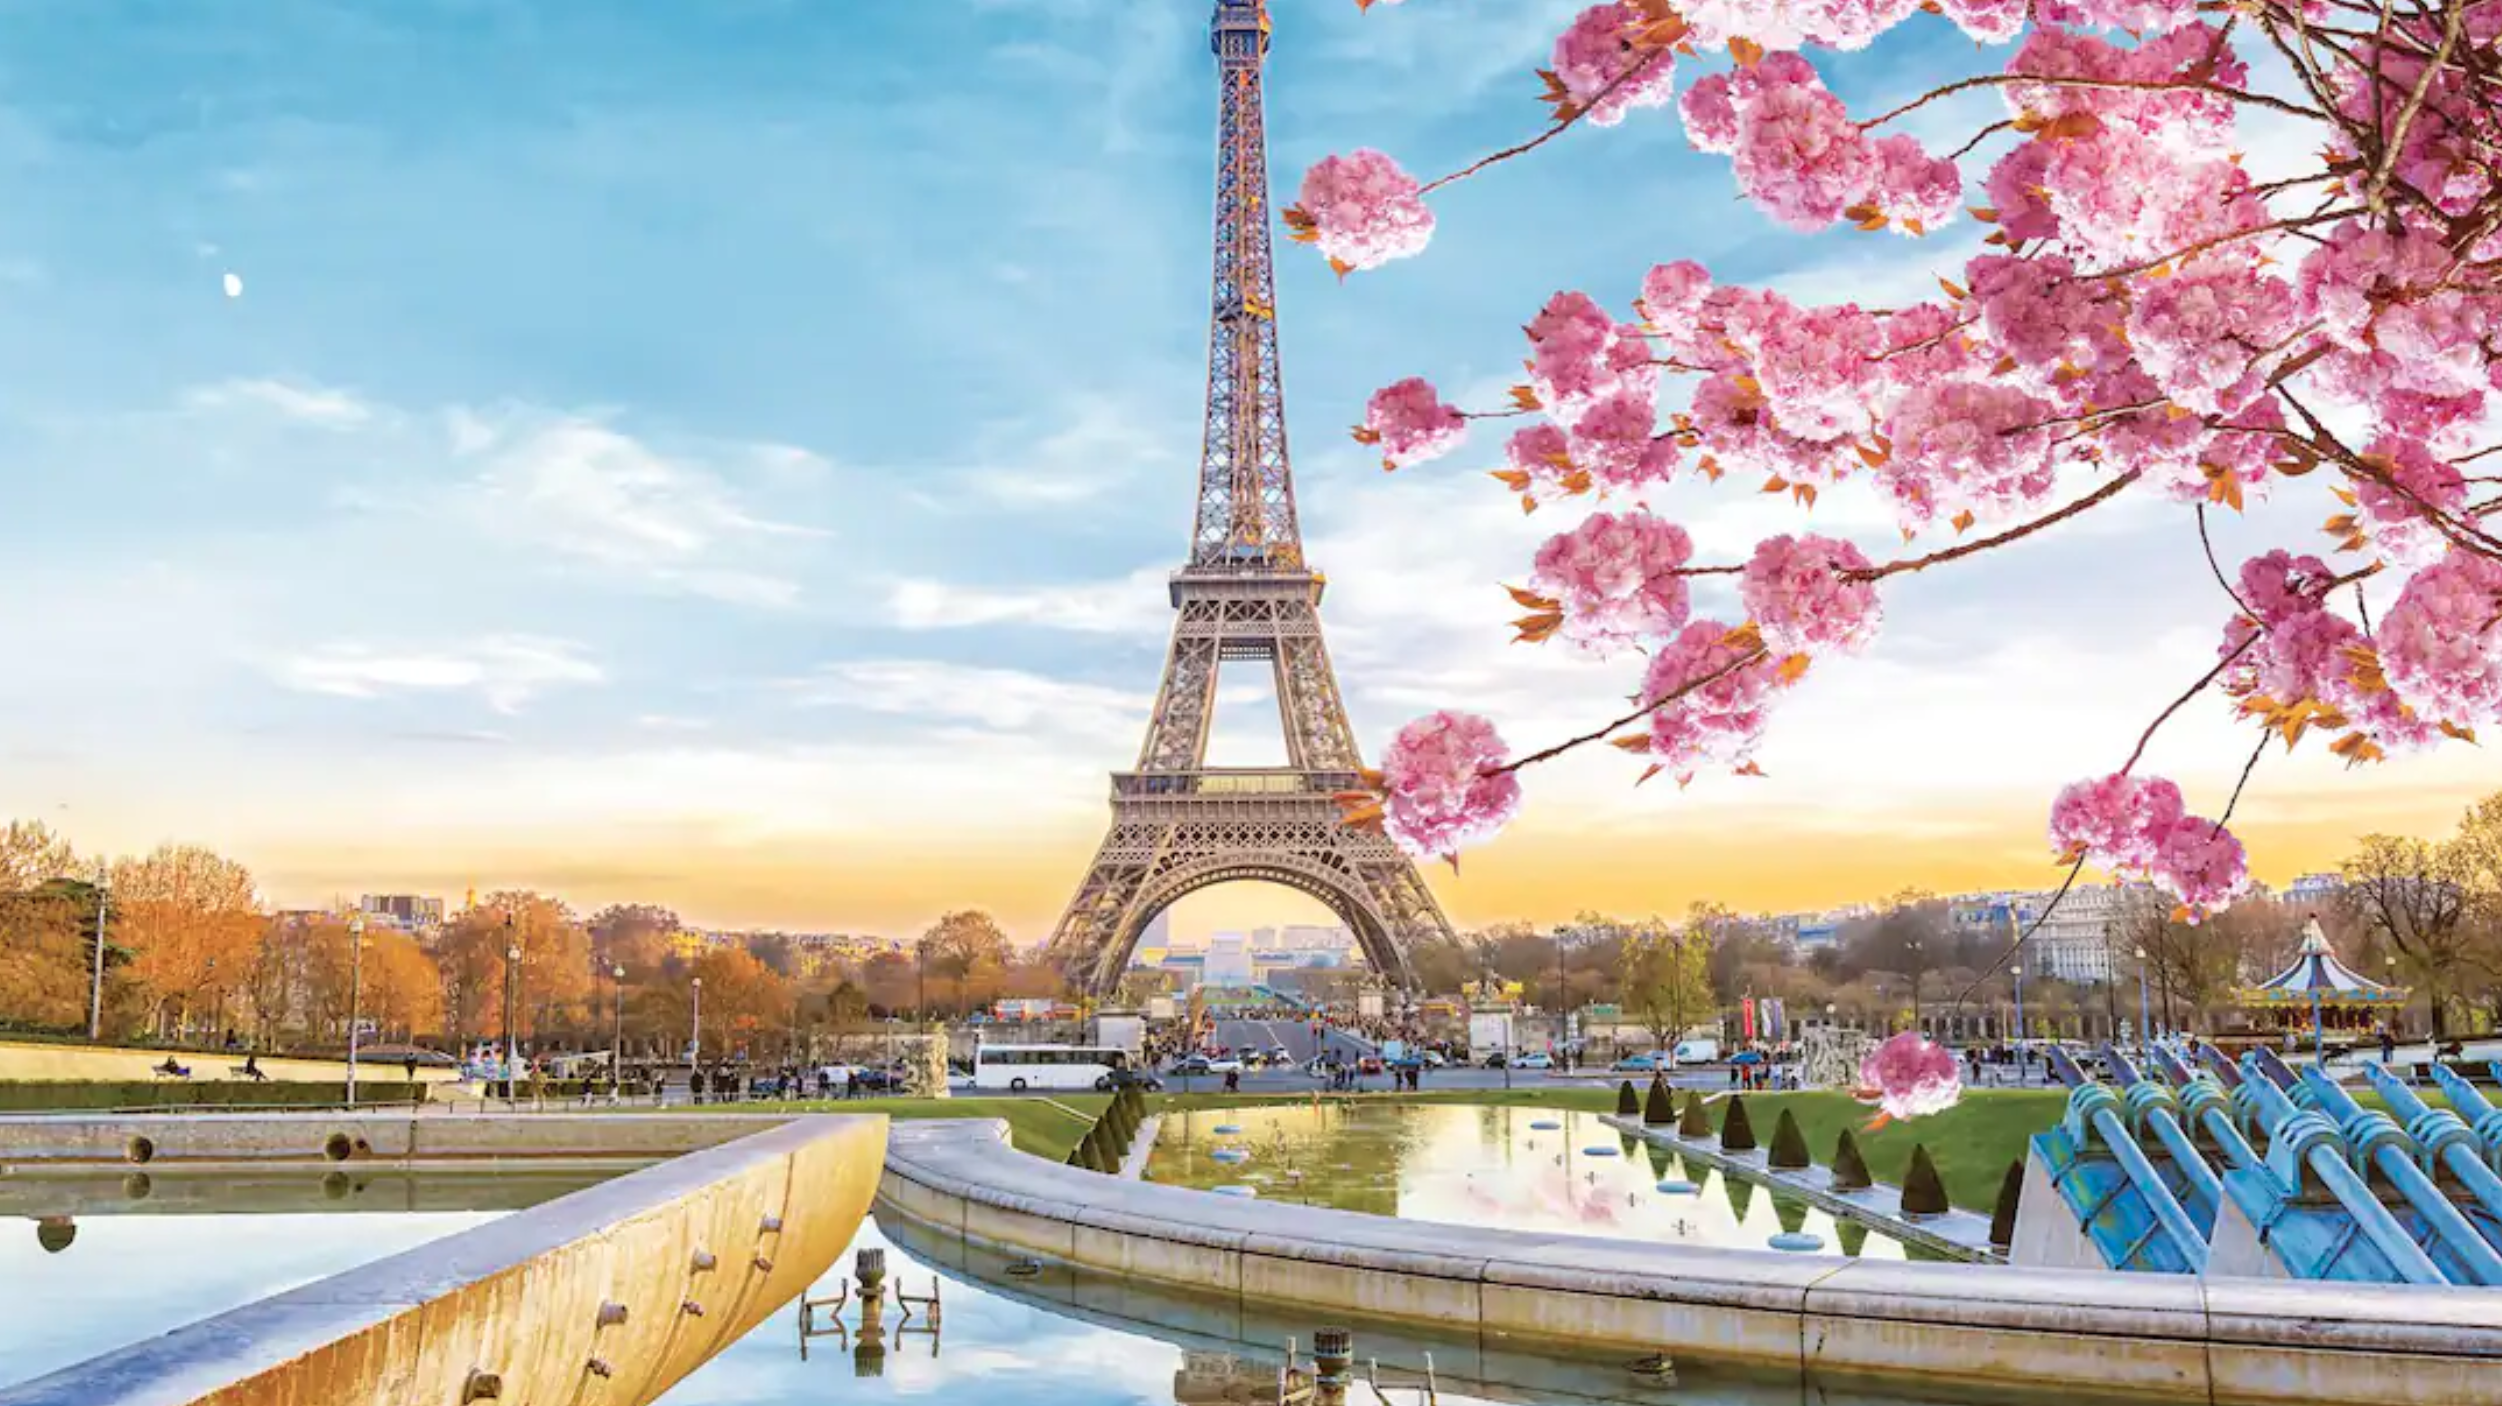 Eiffel Tower in the spring morning in Paris, France